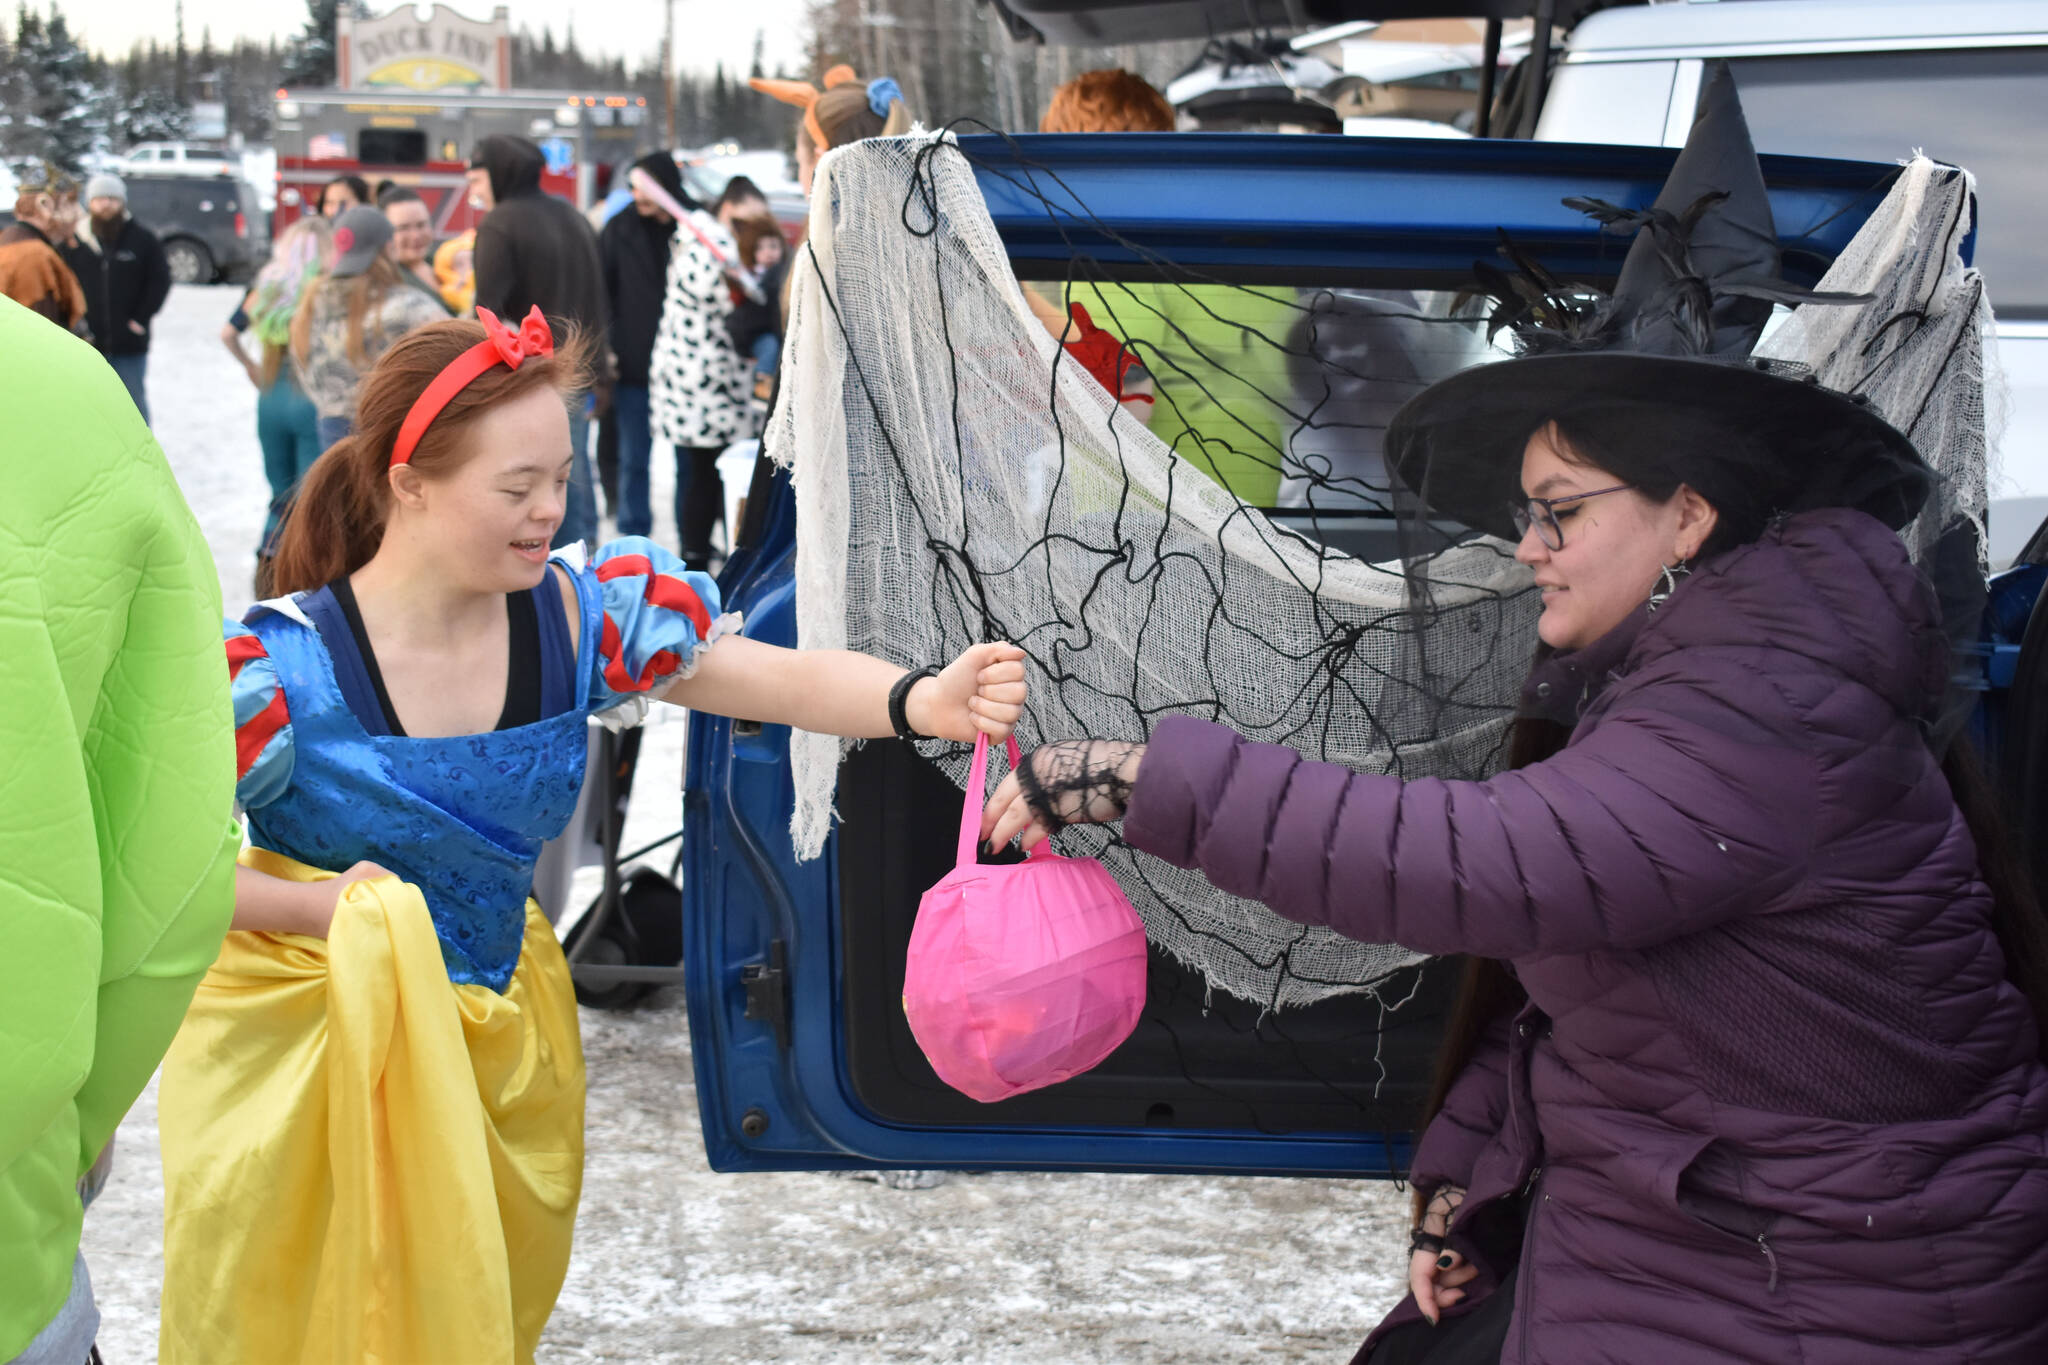 A girl dressed as Snow White takes candy from a witch at the Orca Theater’s Trunk or Treat in Soldotna, Alaska, on Monday, Oct. 31, 2022. (Jake Dye/Peninsula Clarion)